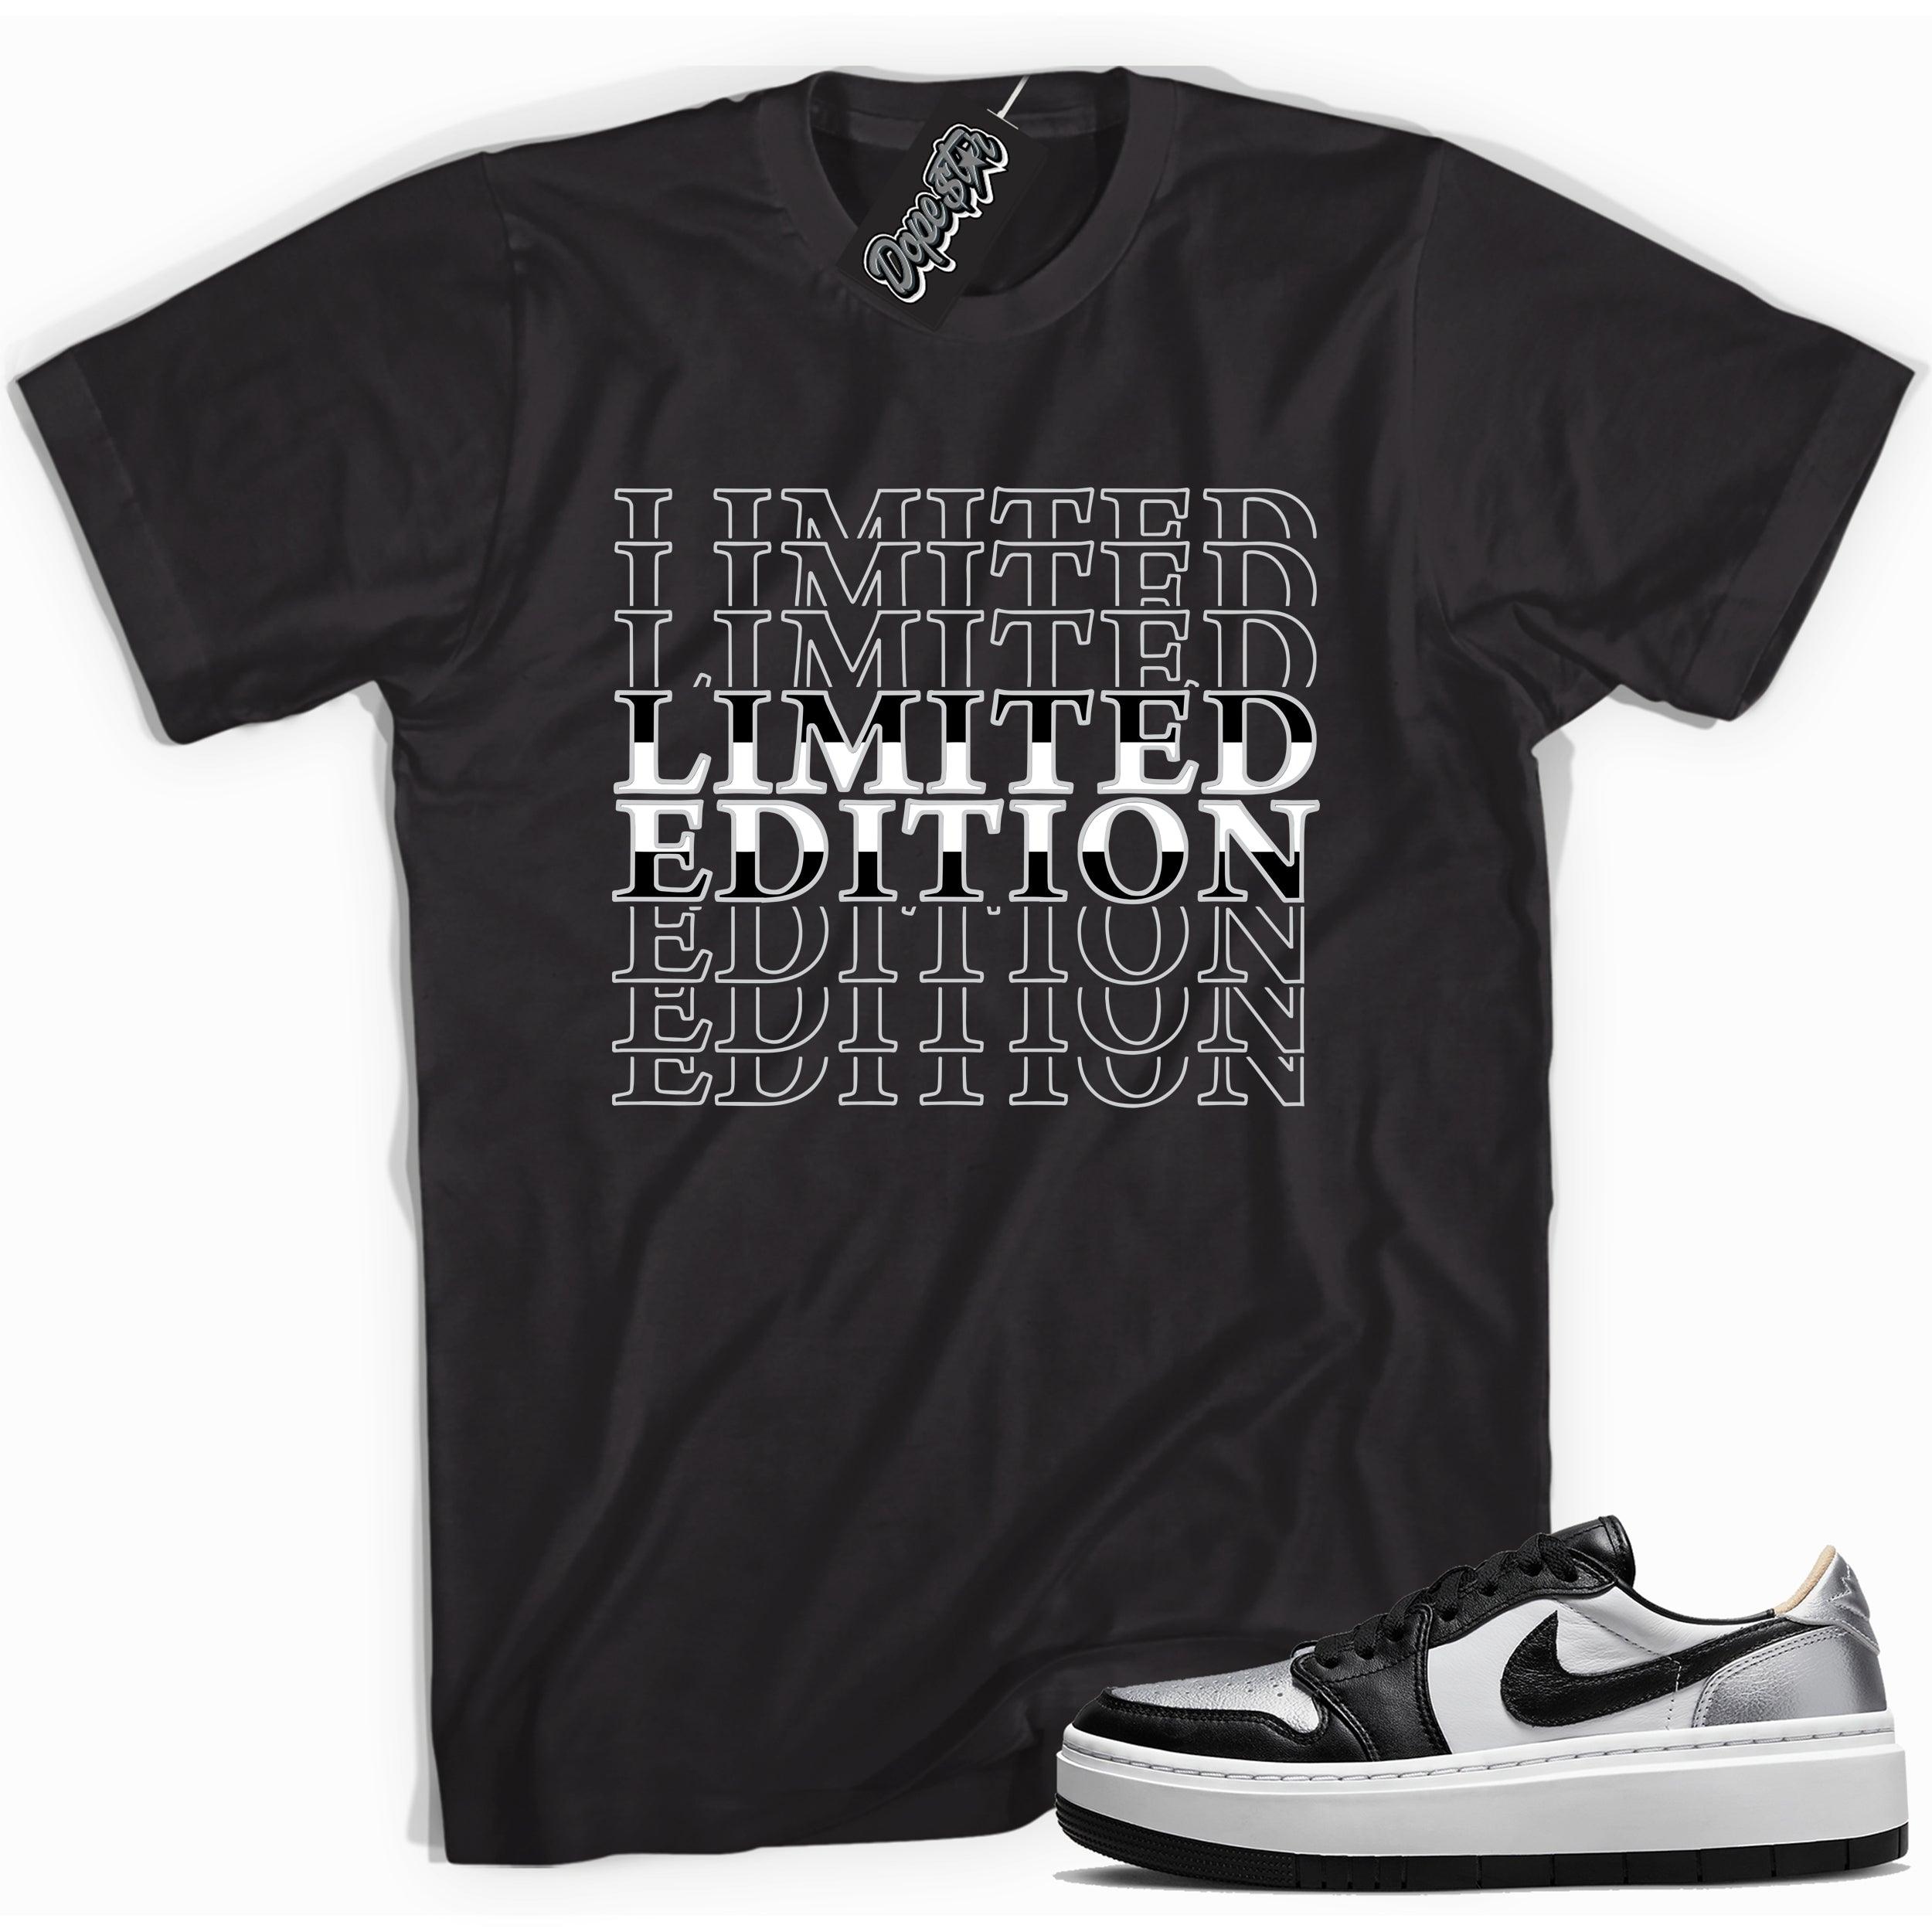 Cool black graphic tee with 'limited edition' print, that perfectly matches Air Jordan 1 Elevate Low SE Silver Toe sneakers.